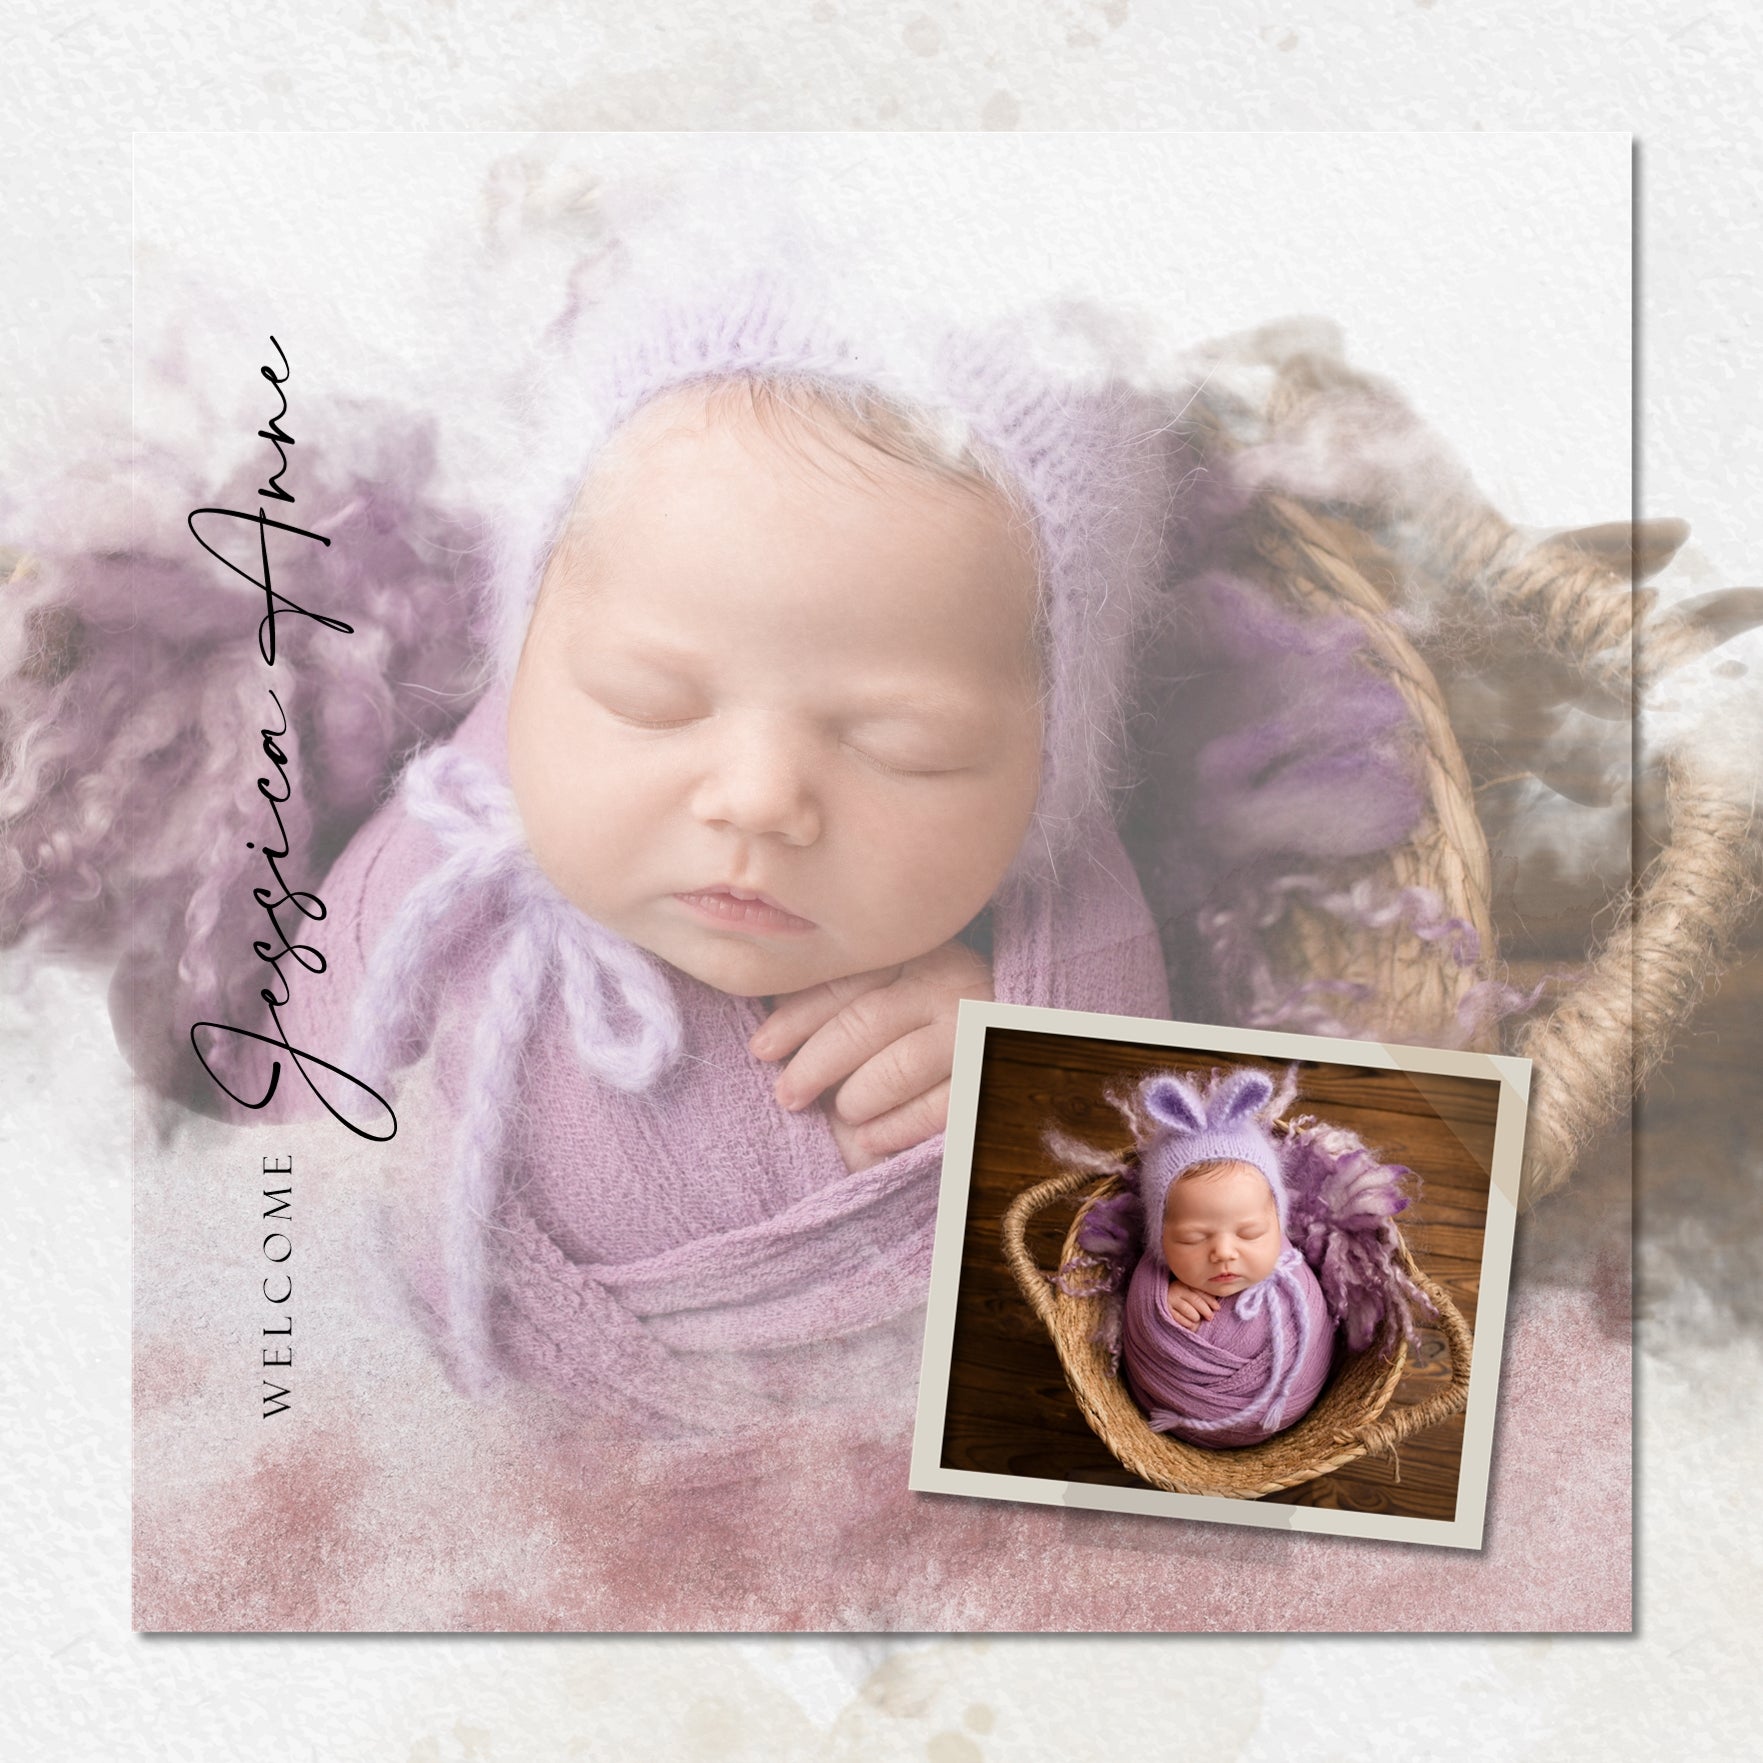 Capture the special moments of your baby through the toddler years with these versatile digital scrapbooking photo frames with washi tape by Lucky Girl Creative digital art that add a special touch to your favorite photos. Create unique baby announcements, baby shower gifts, and even Baby's 1st Year albums. Great for everyday use and can easily be colorized to fit your needs.